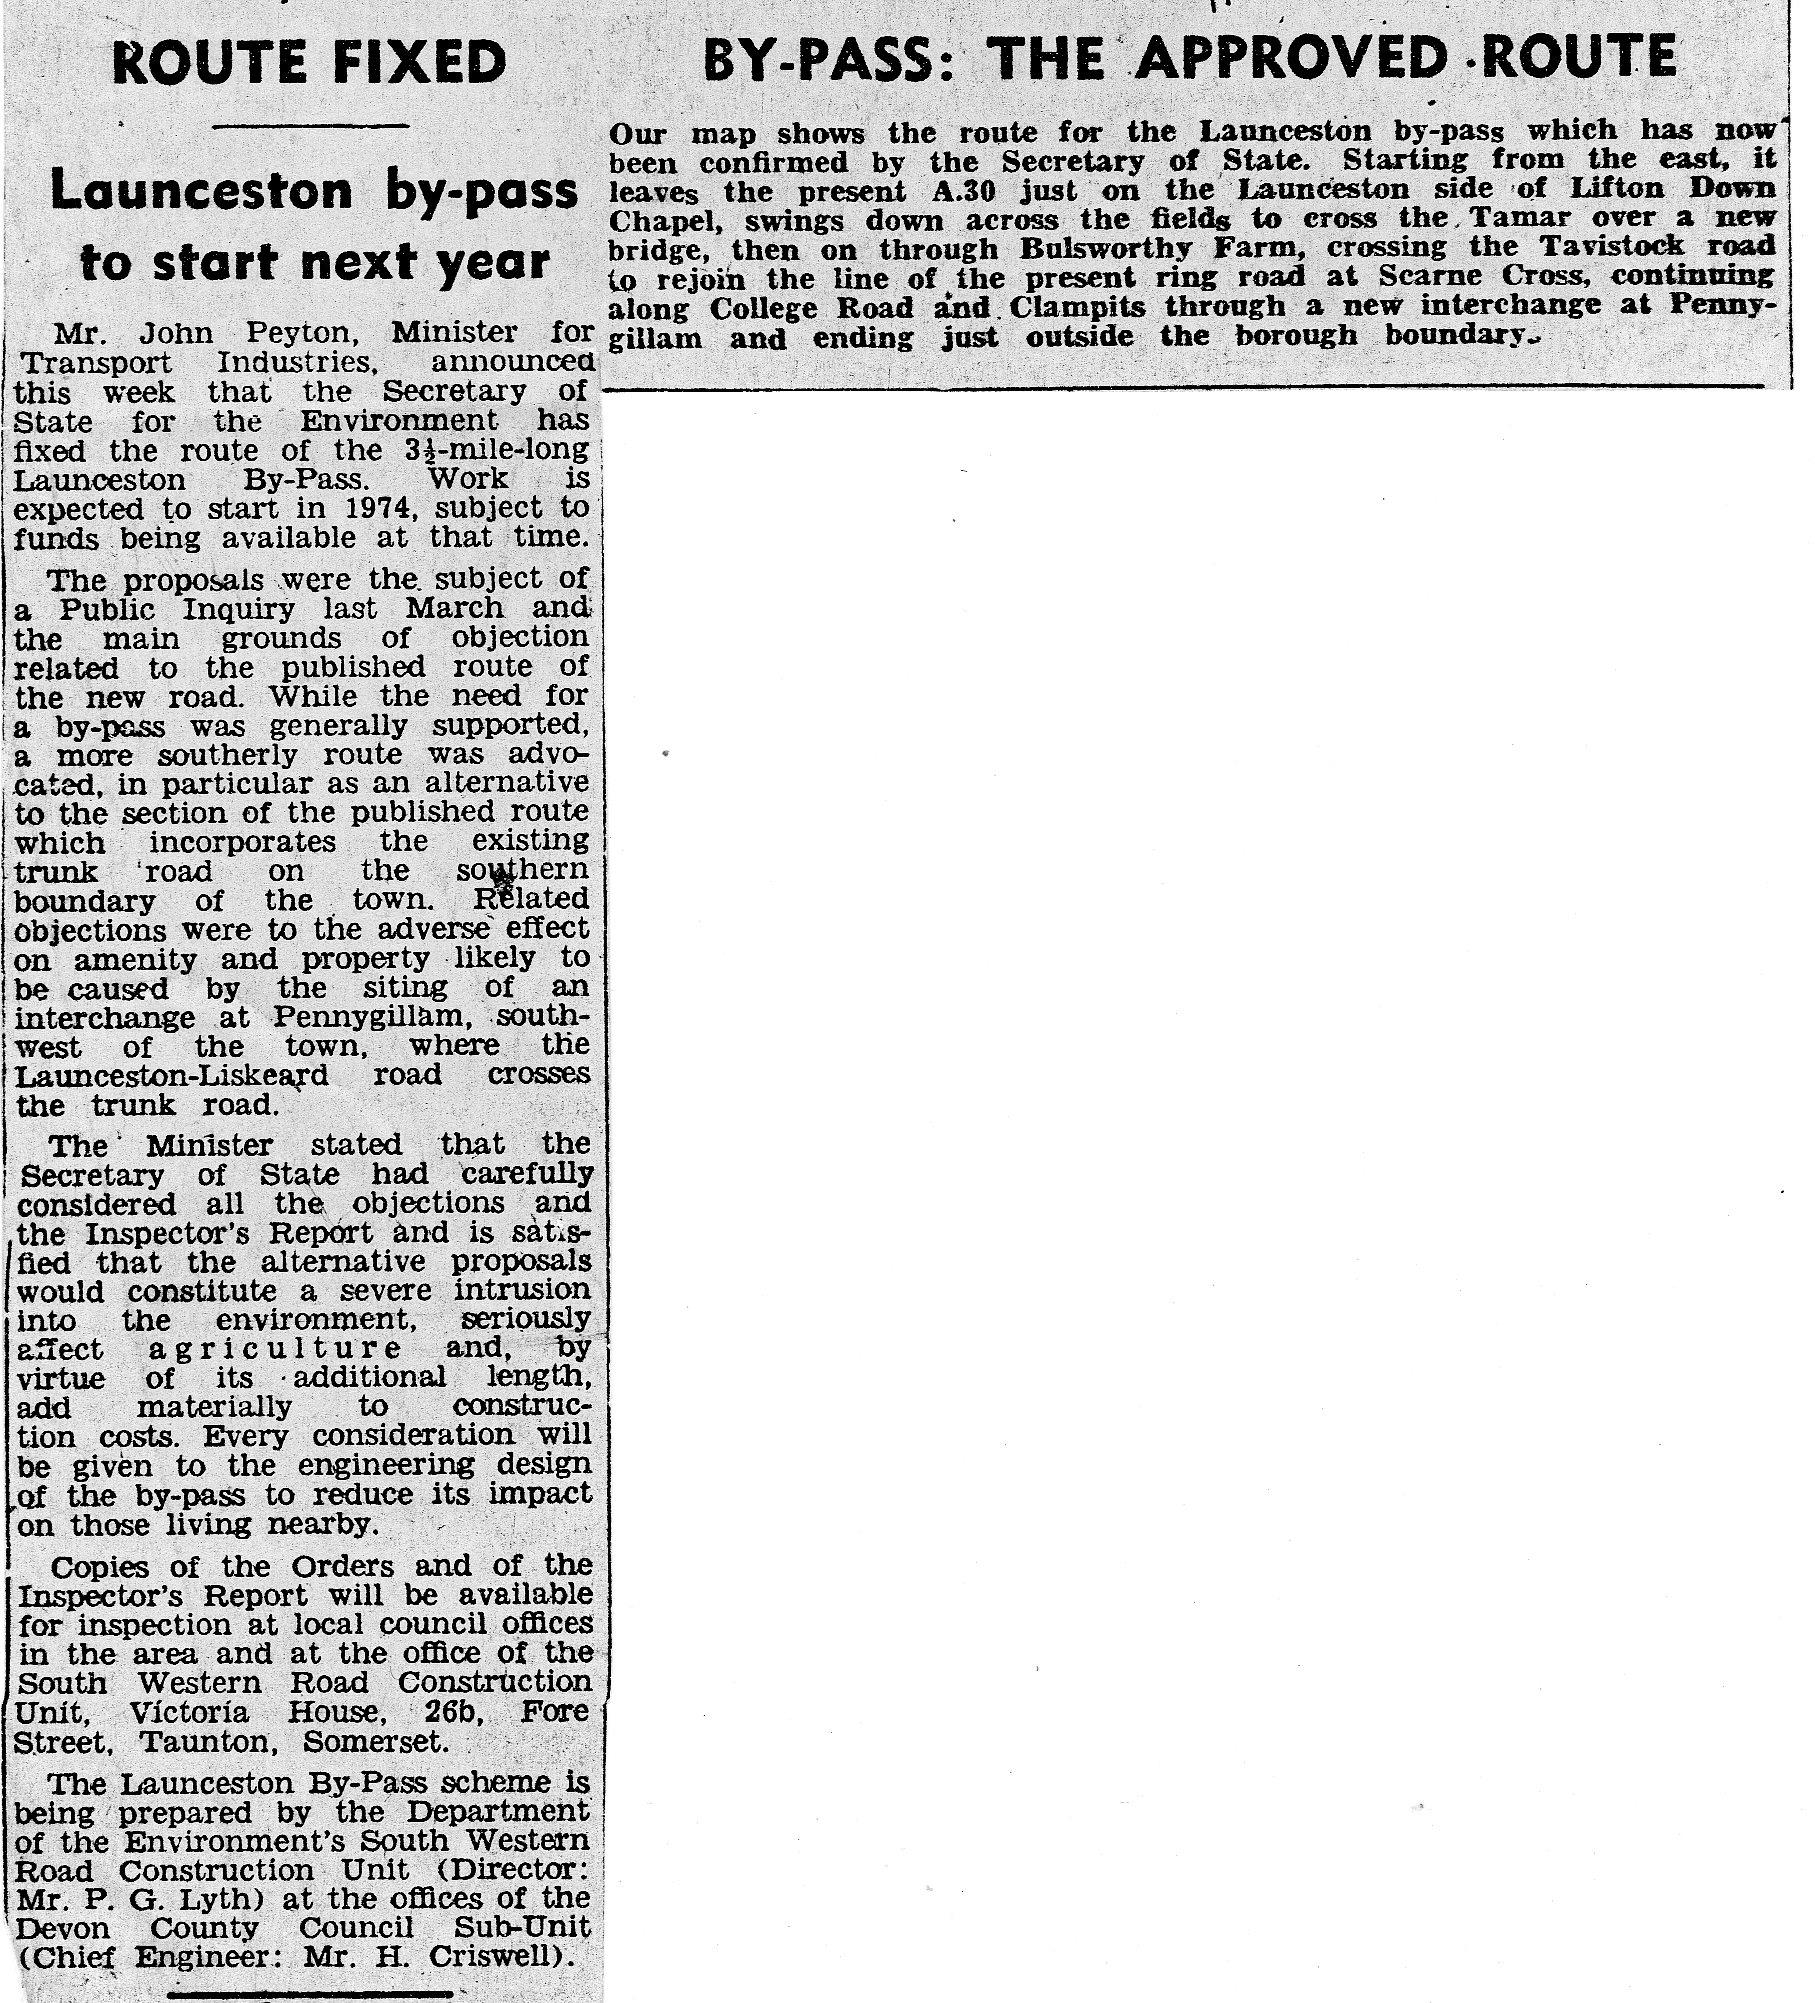 Launceston By-Pass article from 1973.